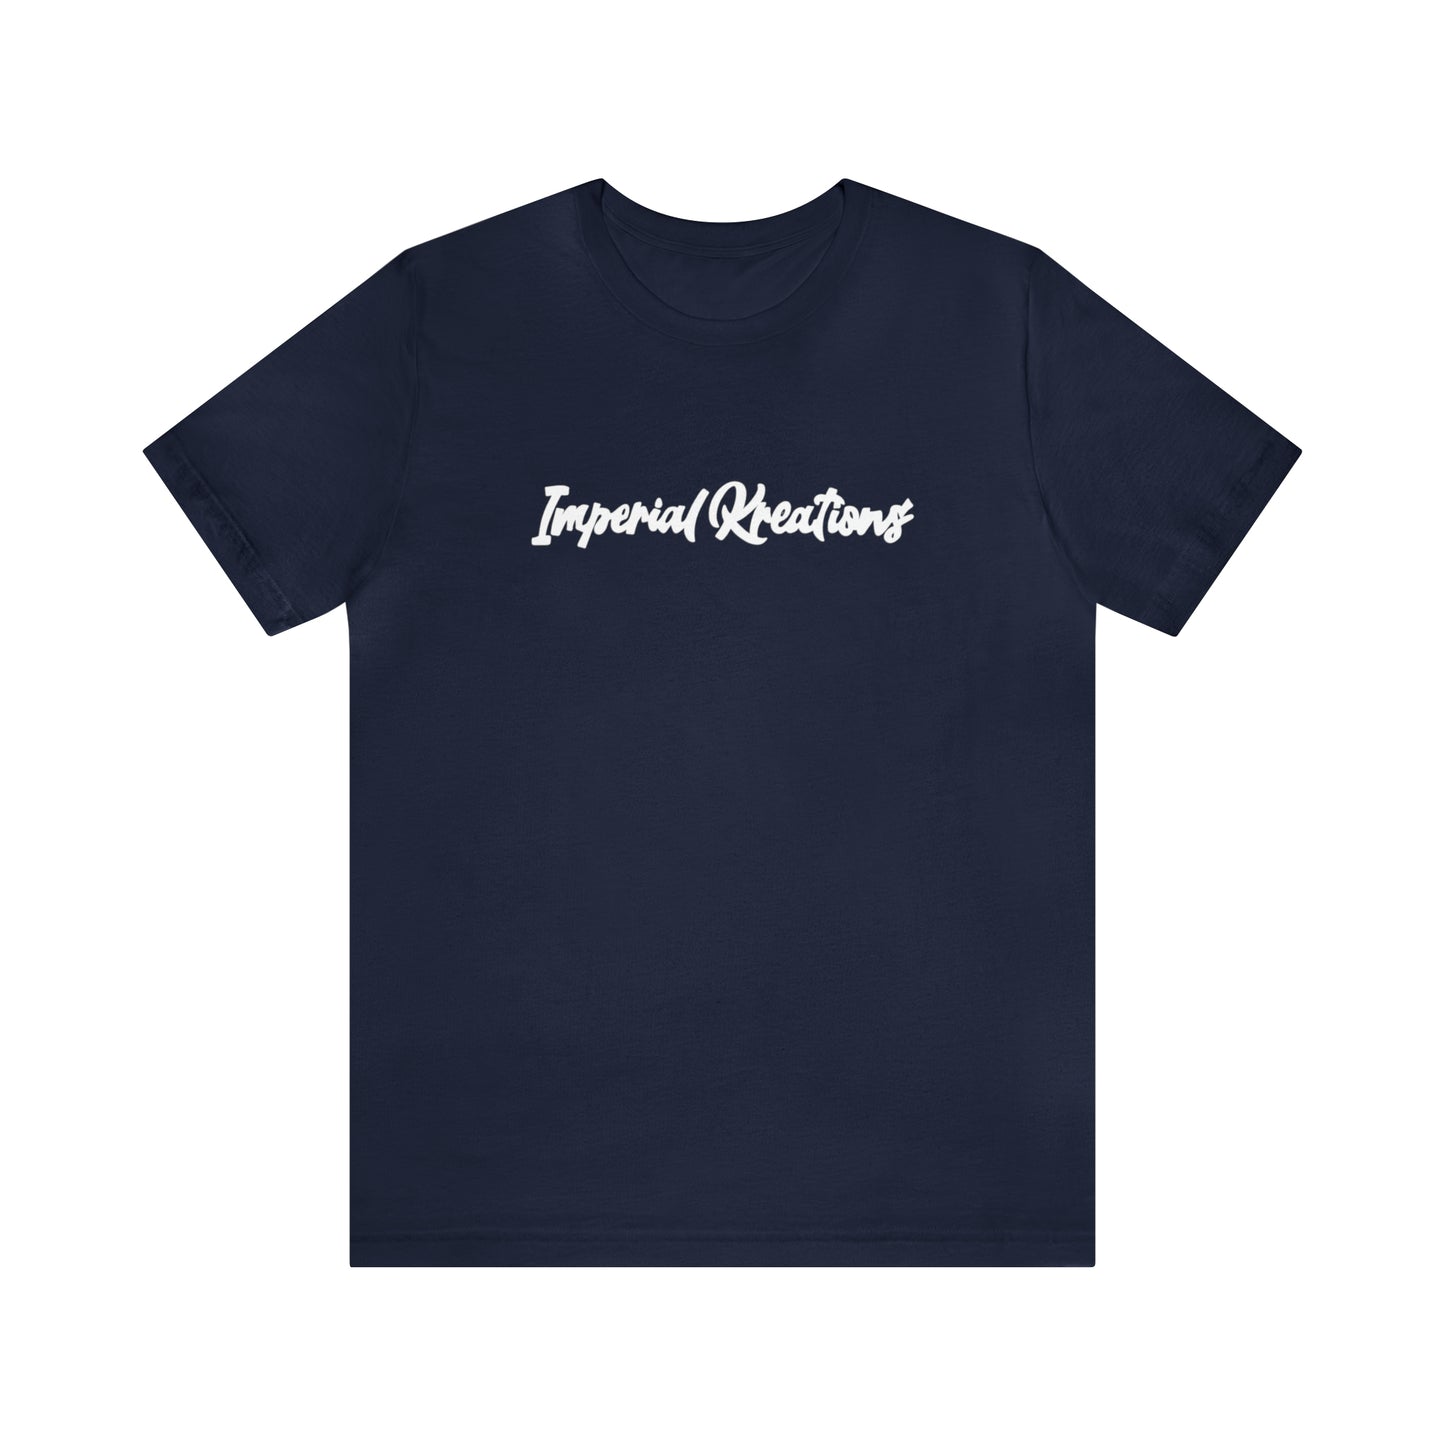 Imperial Kreations T-shirt